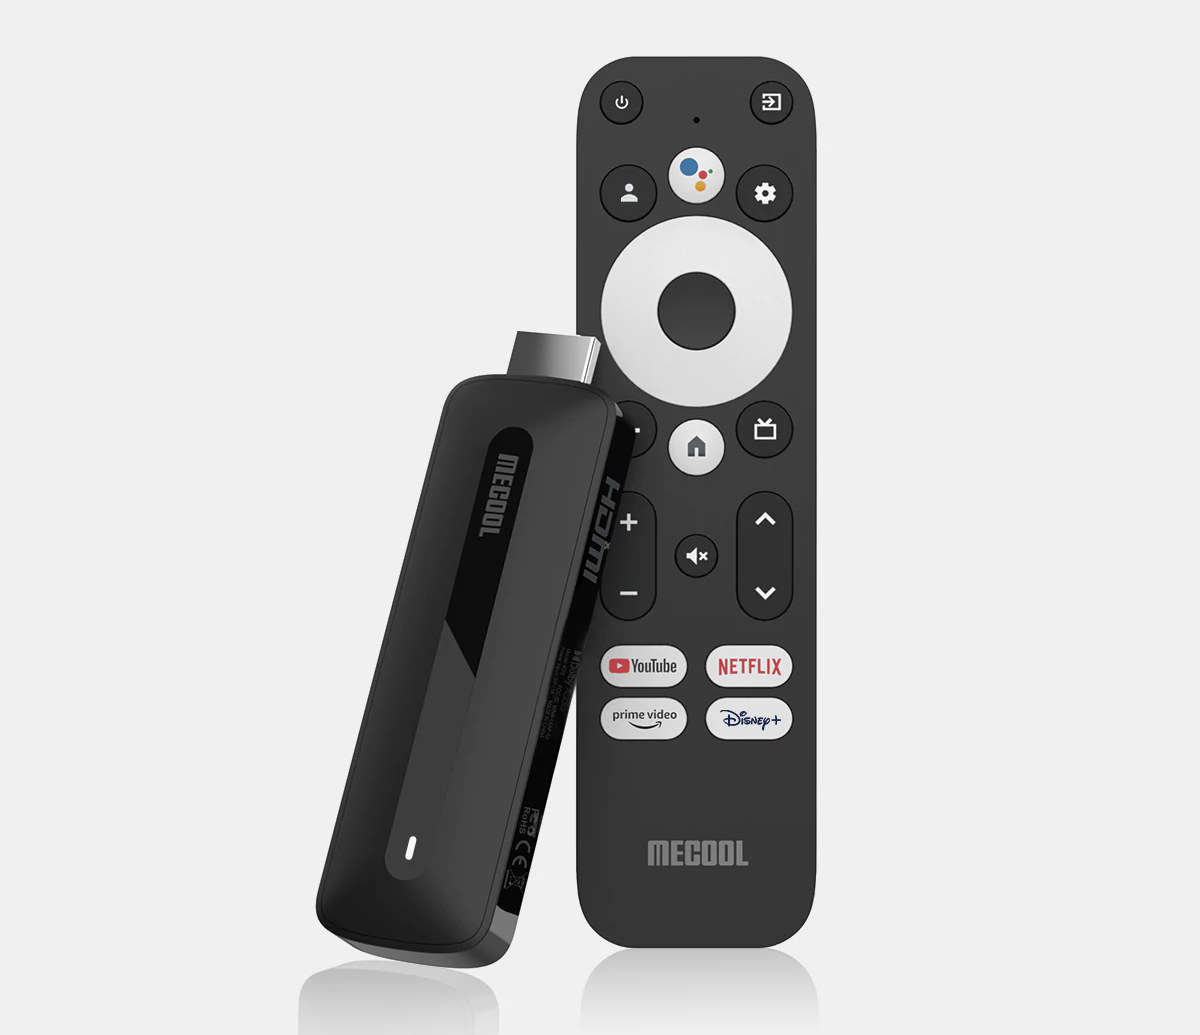 Mecool KM2 - Android TV Guide